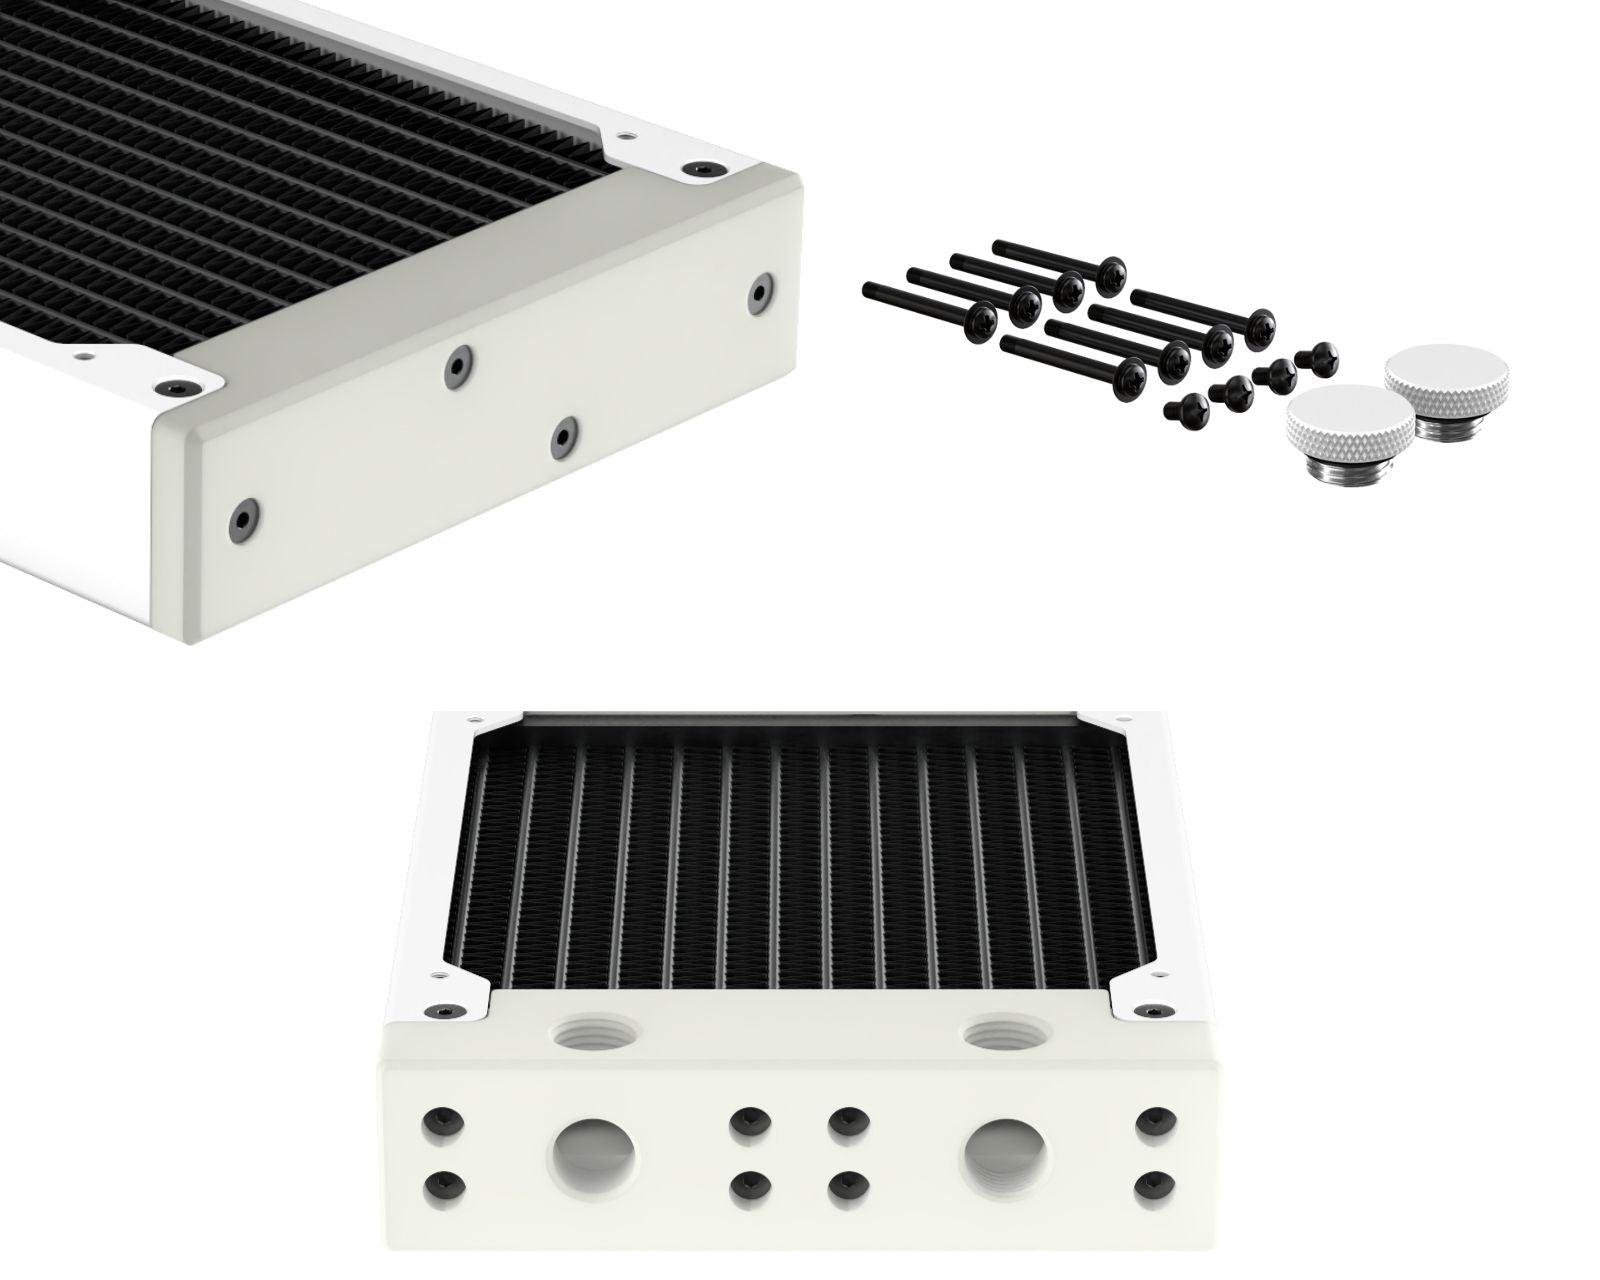 PrimoChill 240SL (30mm) EXIMO Modular Radiator, White POM, 2x120mm, Dual Fan (R-SL-W24) Available in 20+ Colors, Assembled in USA and Custom Watercooling Loop Ready - Sky White